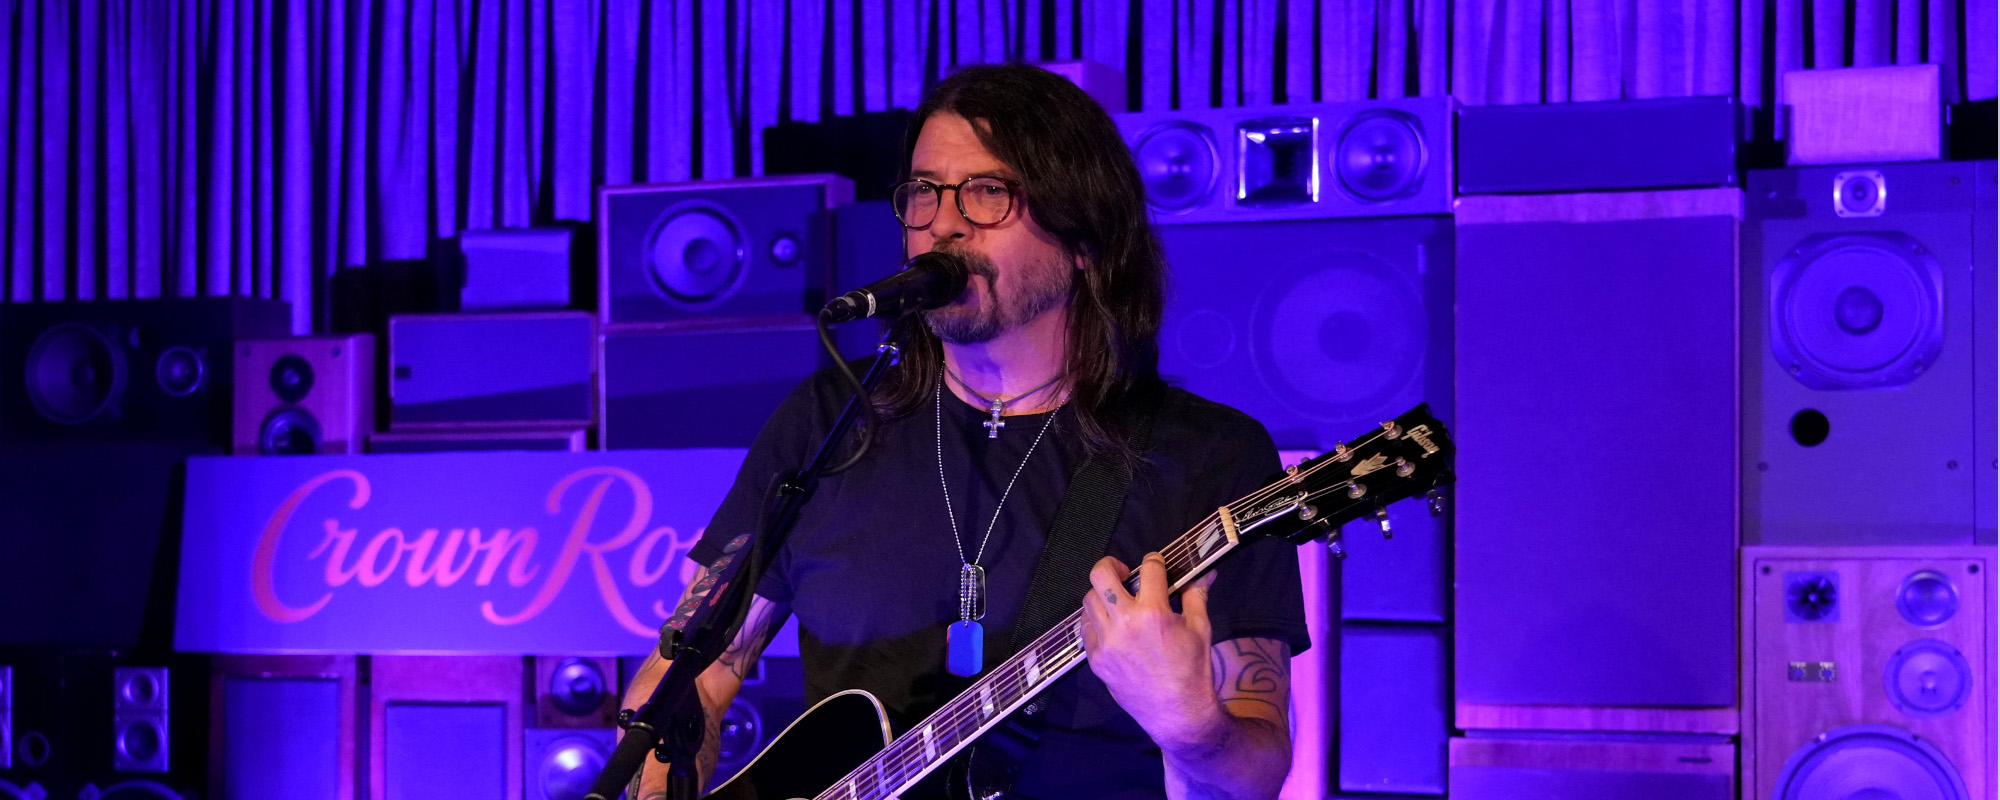 Songs you had no idea were written by Dave Grohl 